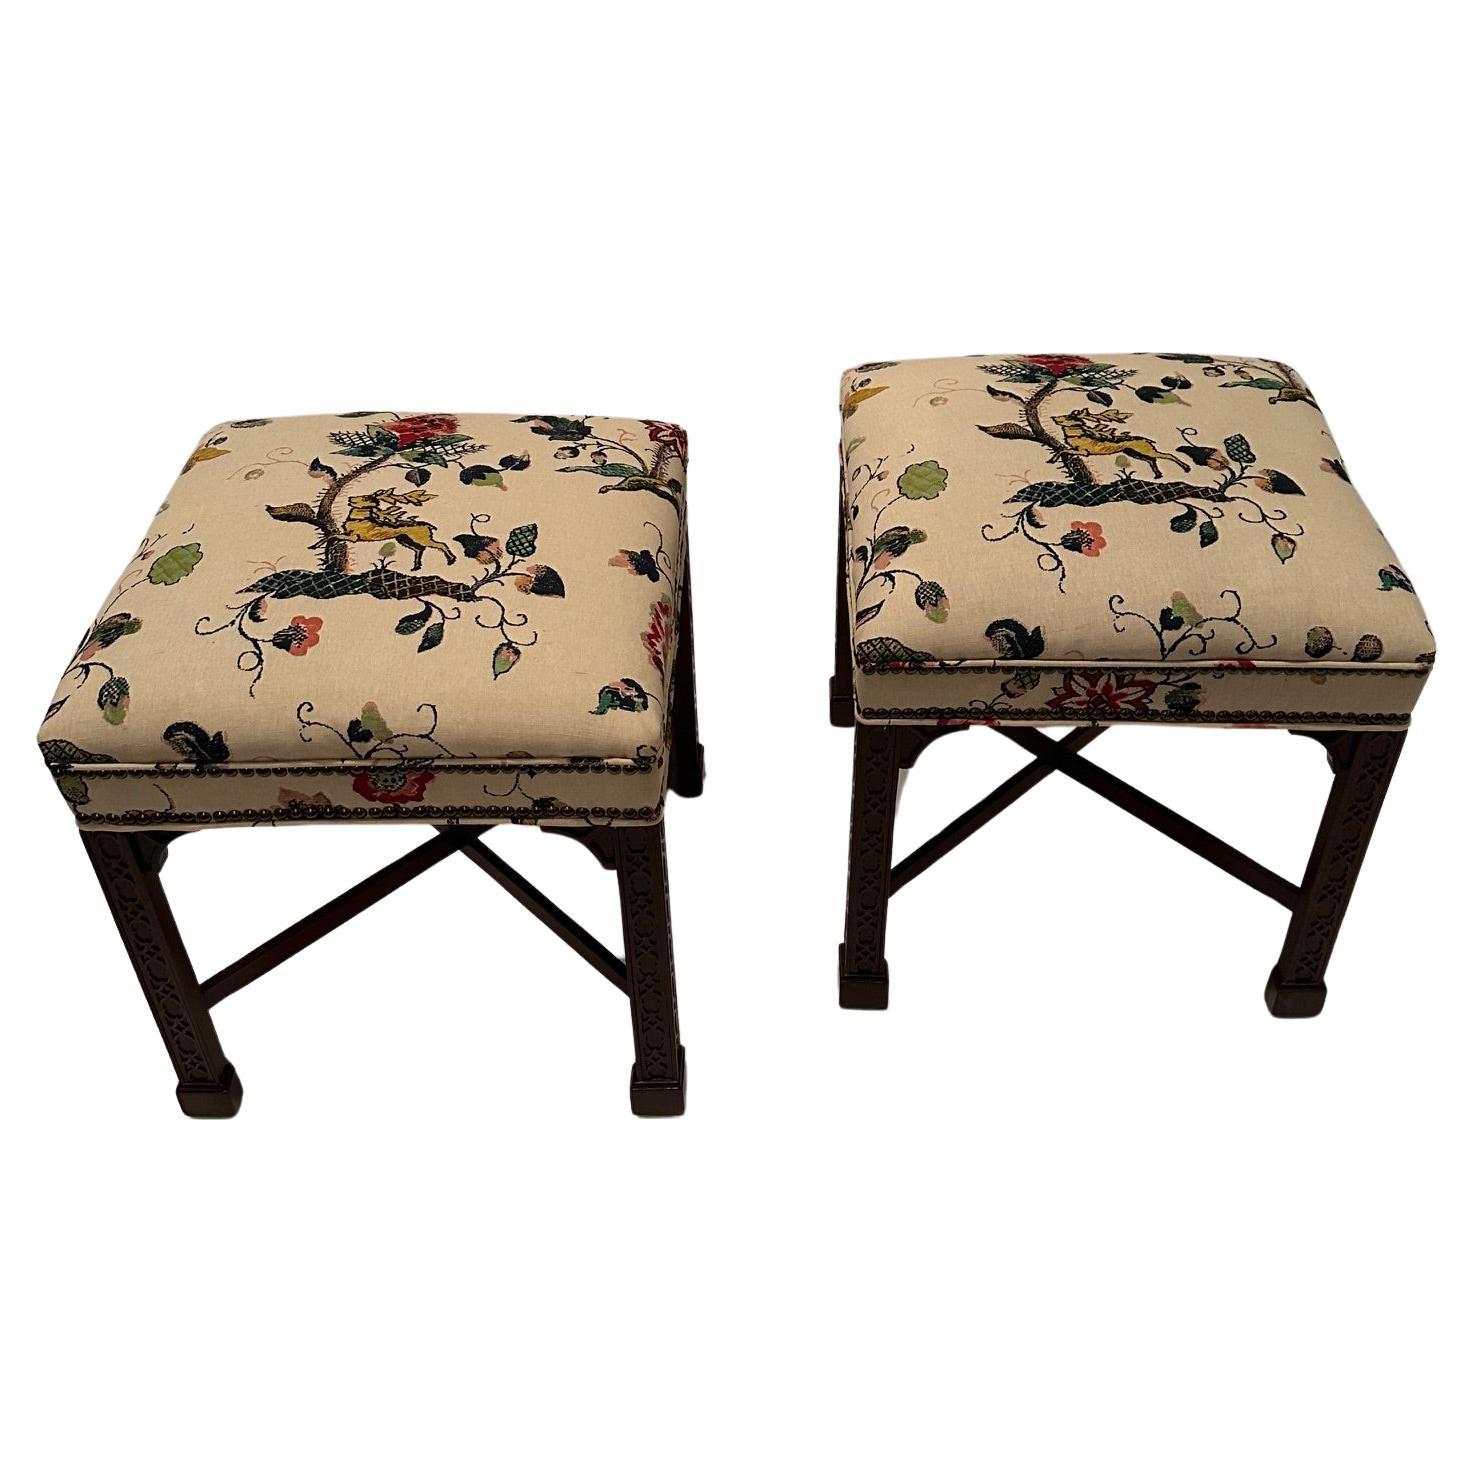 Lovely Pair of Vintage Chinese Chippendale Style Benches Upholstered in Lee Jofa